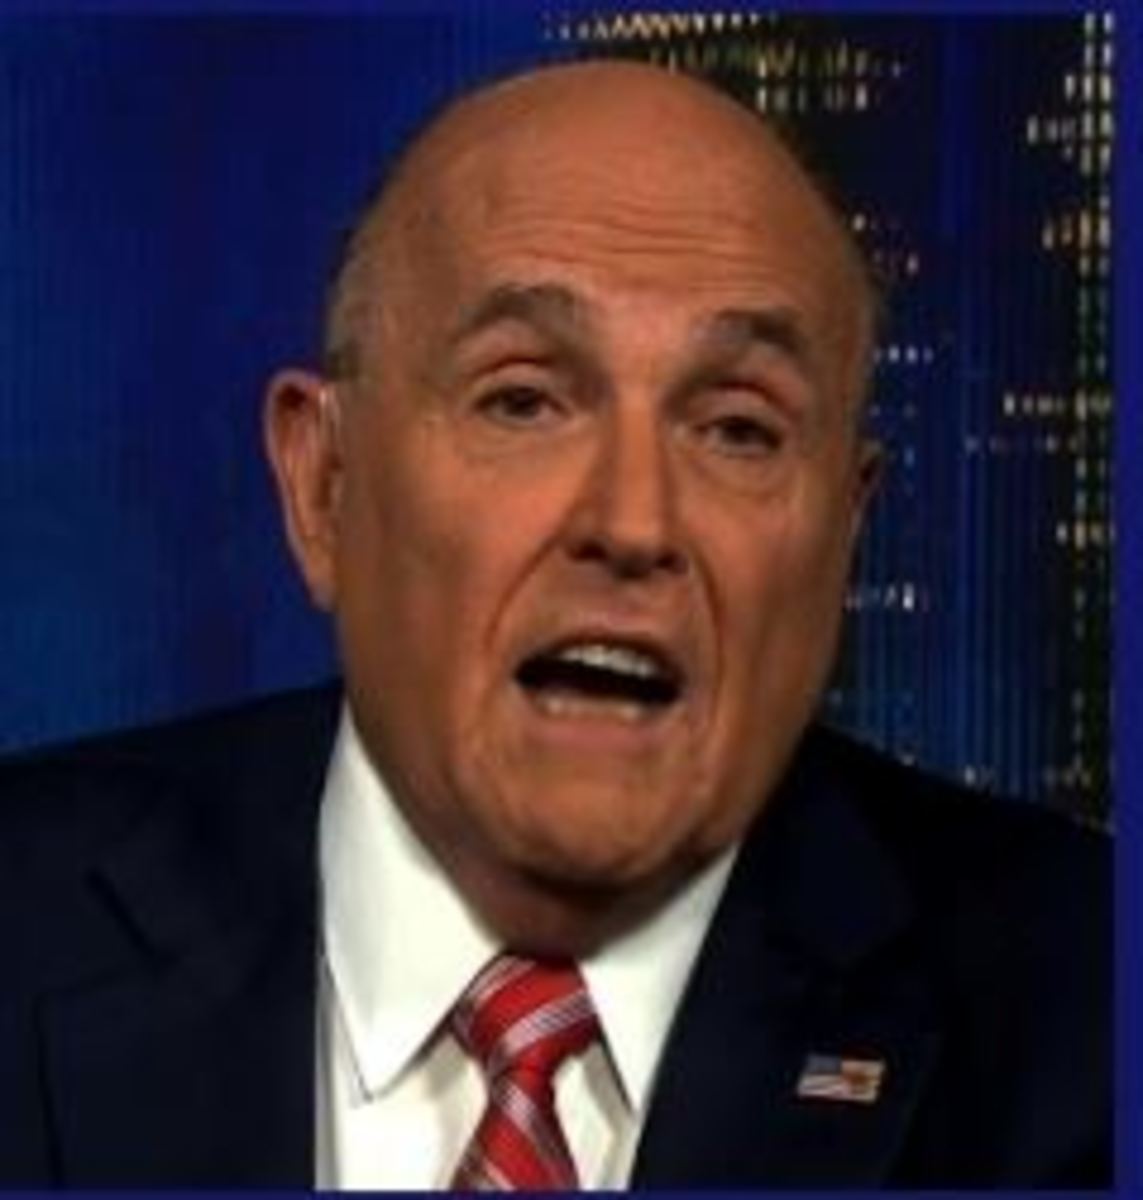 Donald Trump's lawyer, Rudy Giuliani, told CNN that he never claimed there was "no collusion" between the Trump campaign and Russia. 